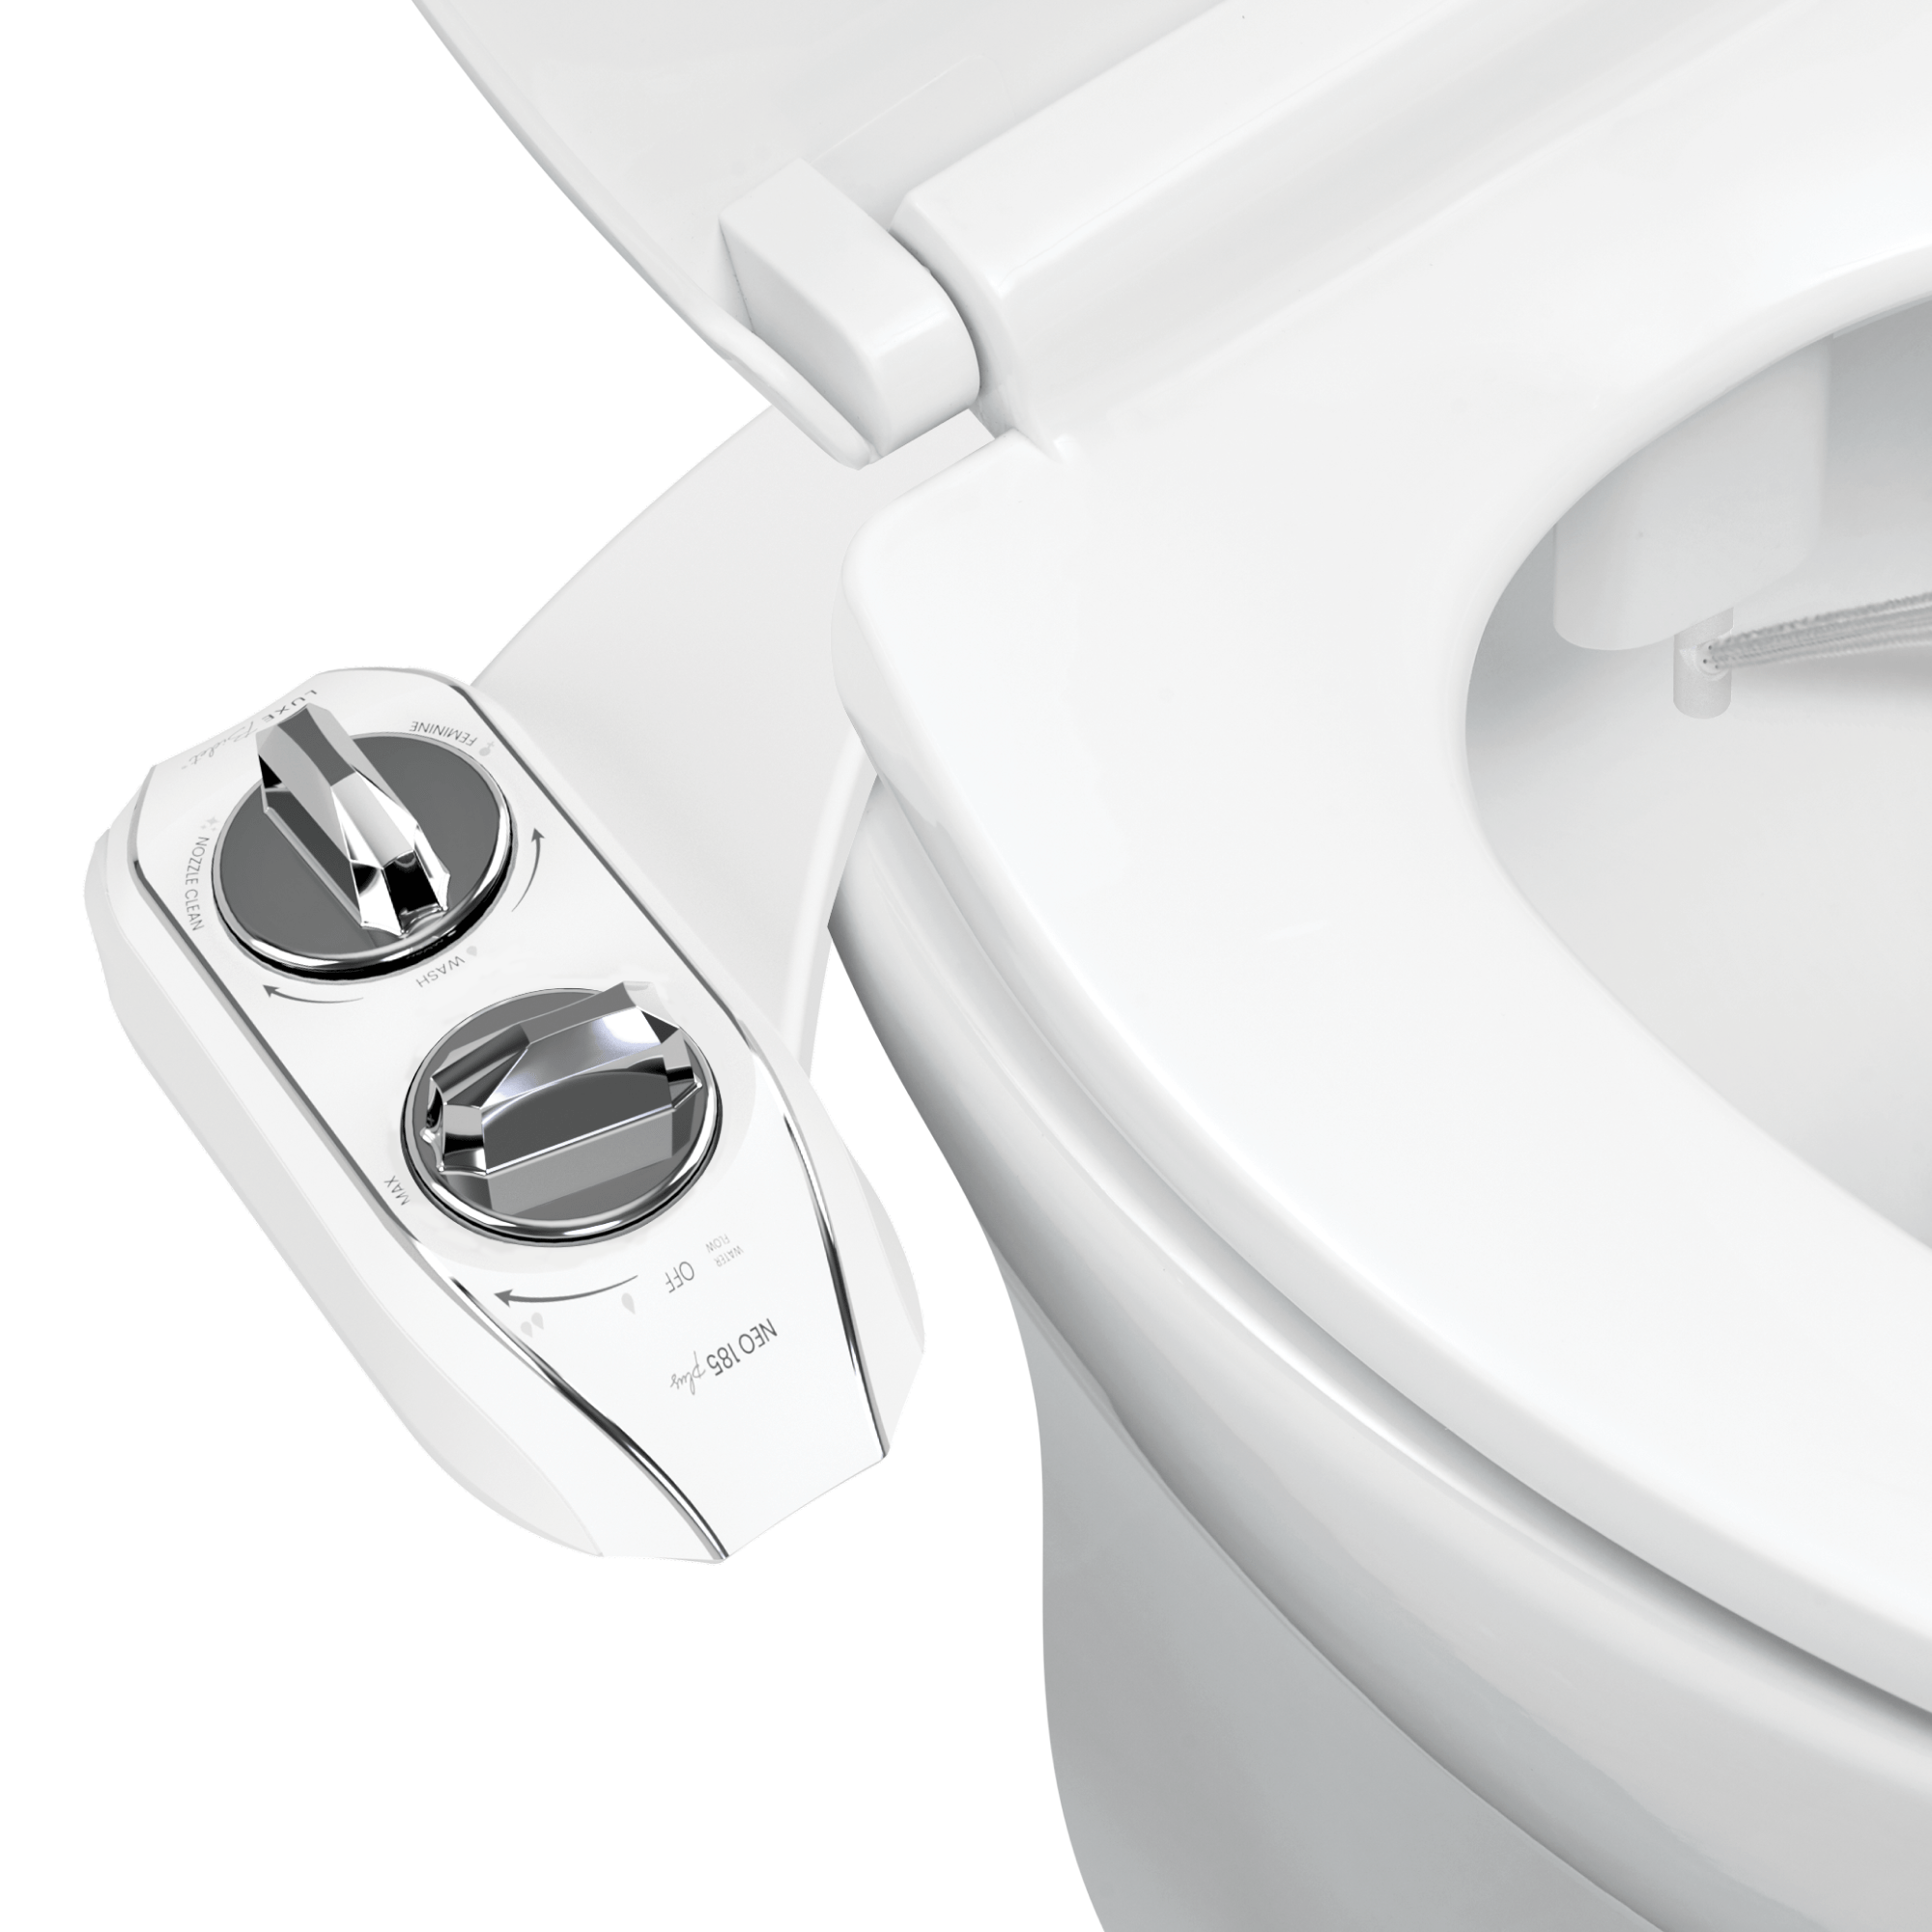 NEO 185 Plus: Imperfect Packaging - NEO 185 Plus Chrome installed on a toilet with water spraying from nozzles